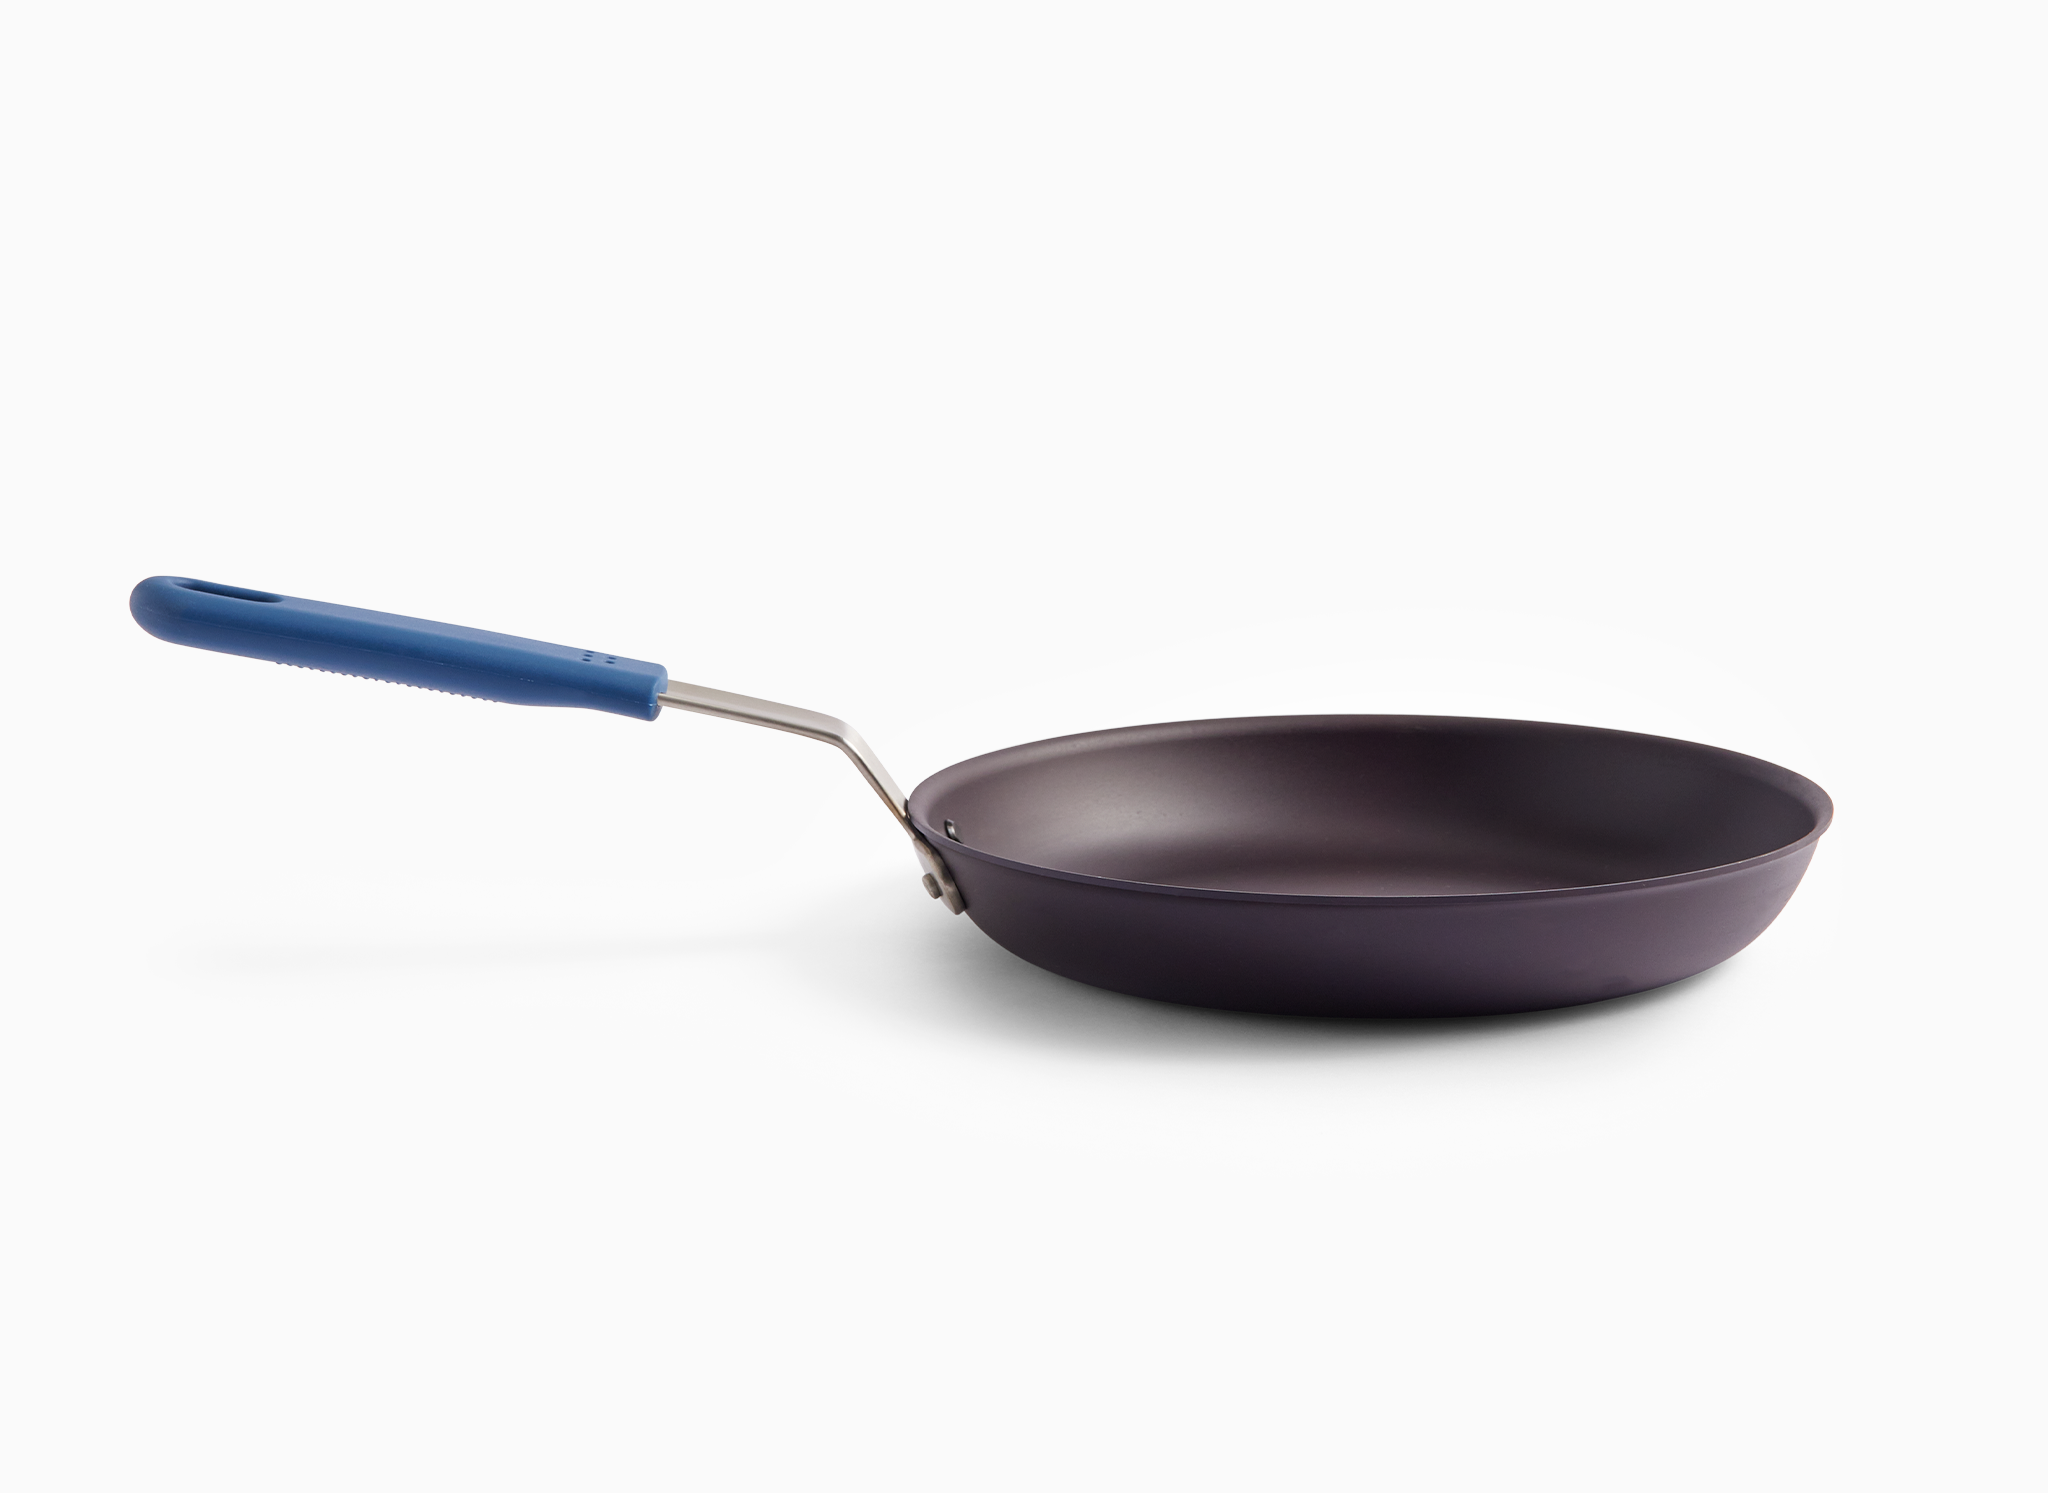 Professional-Quality Cookware, Non Stick, Carbon Steel, and Knives